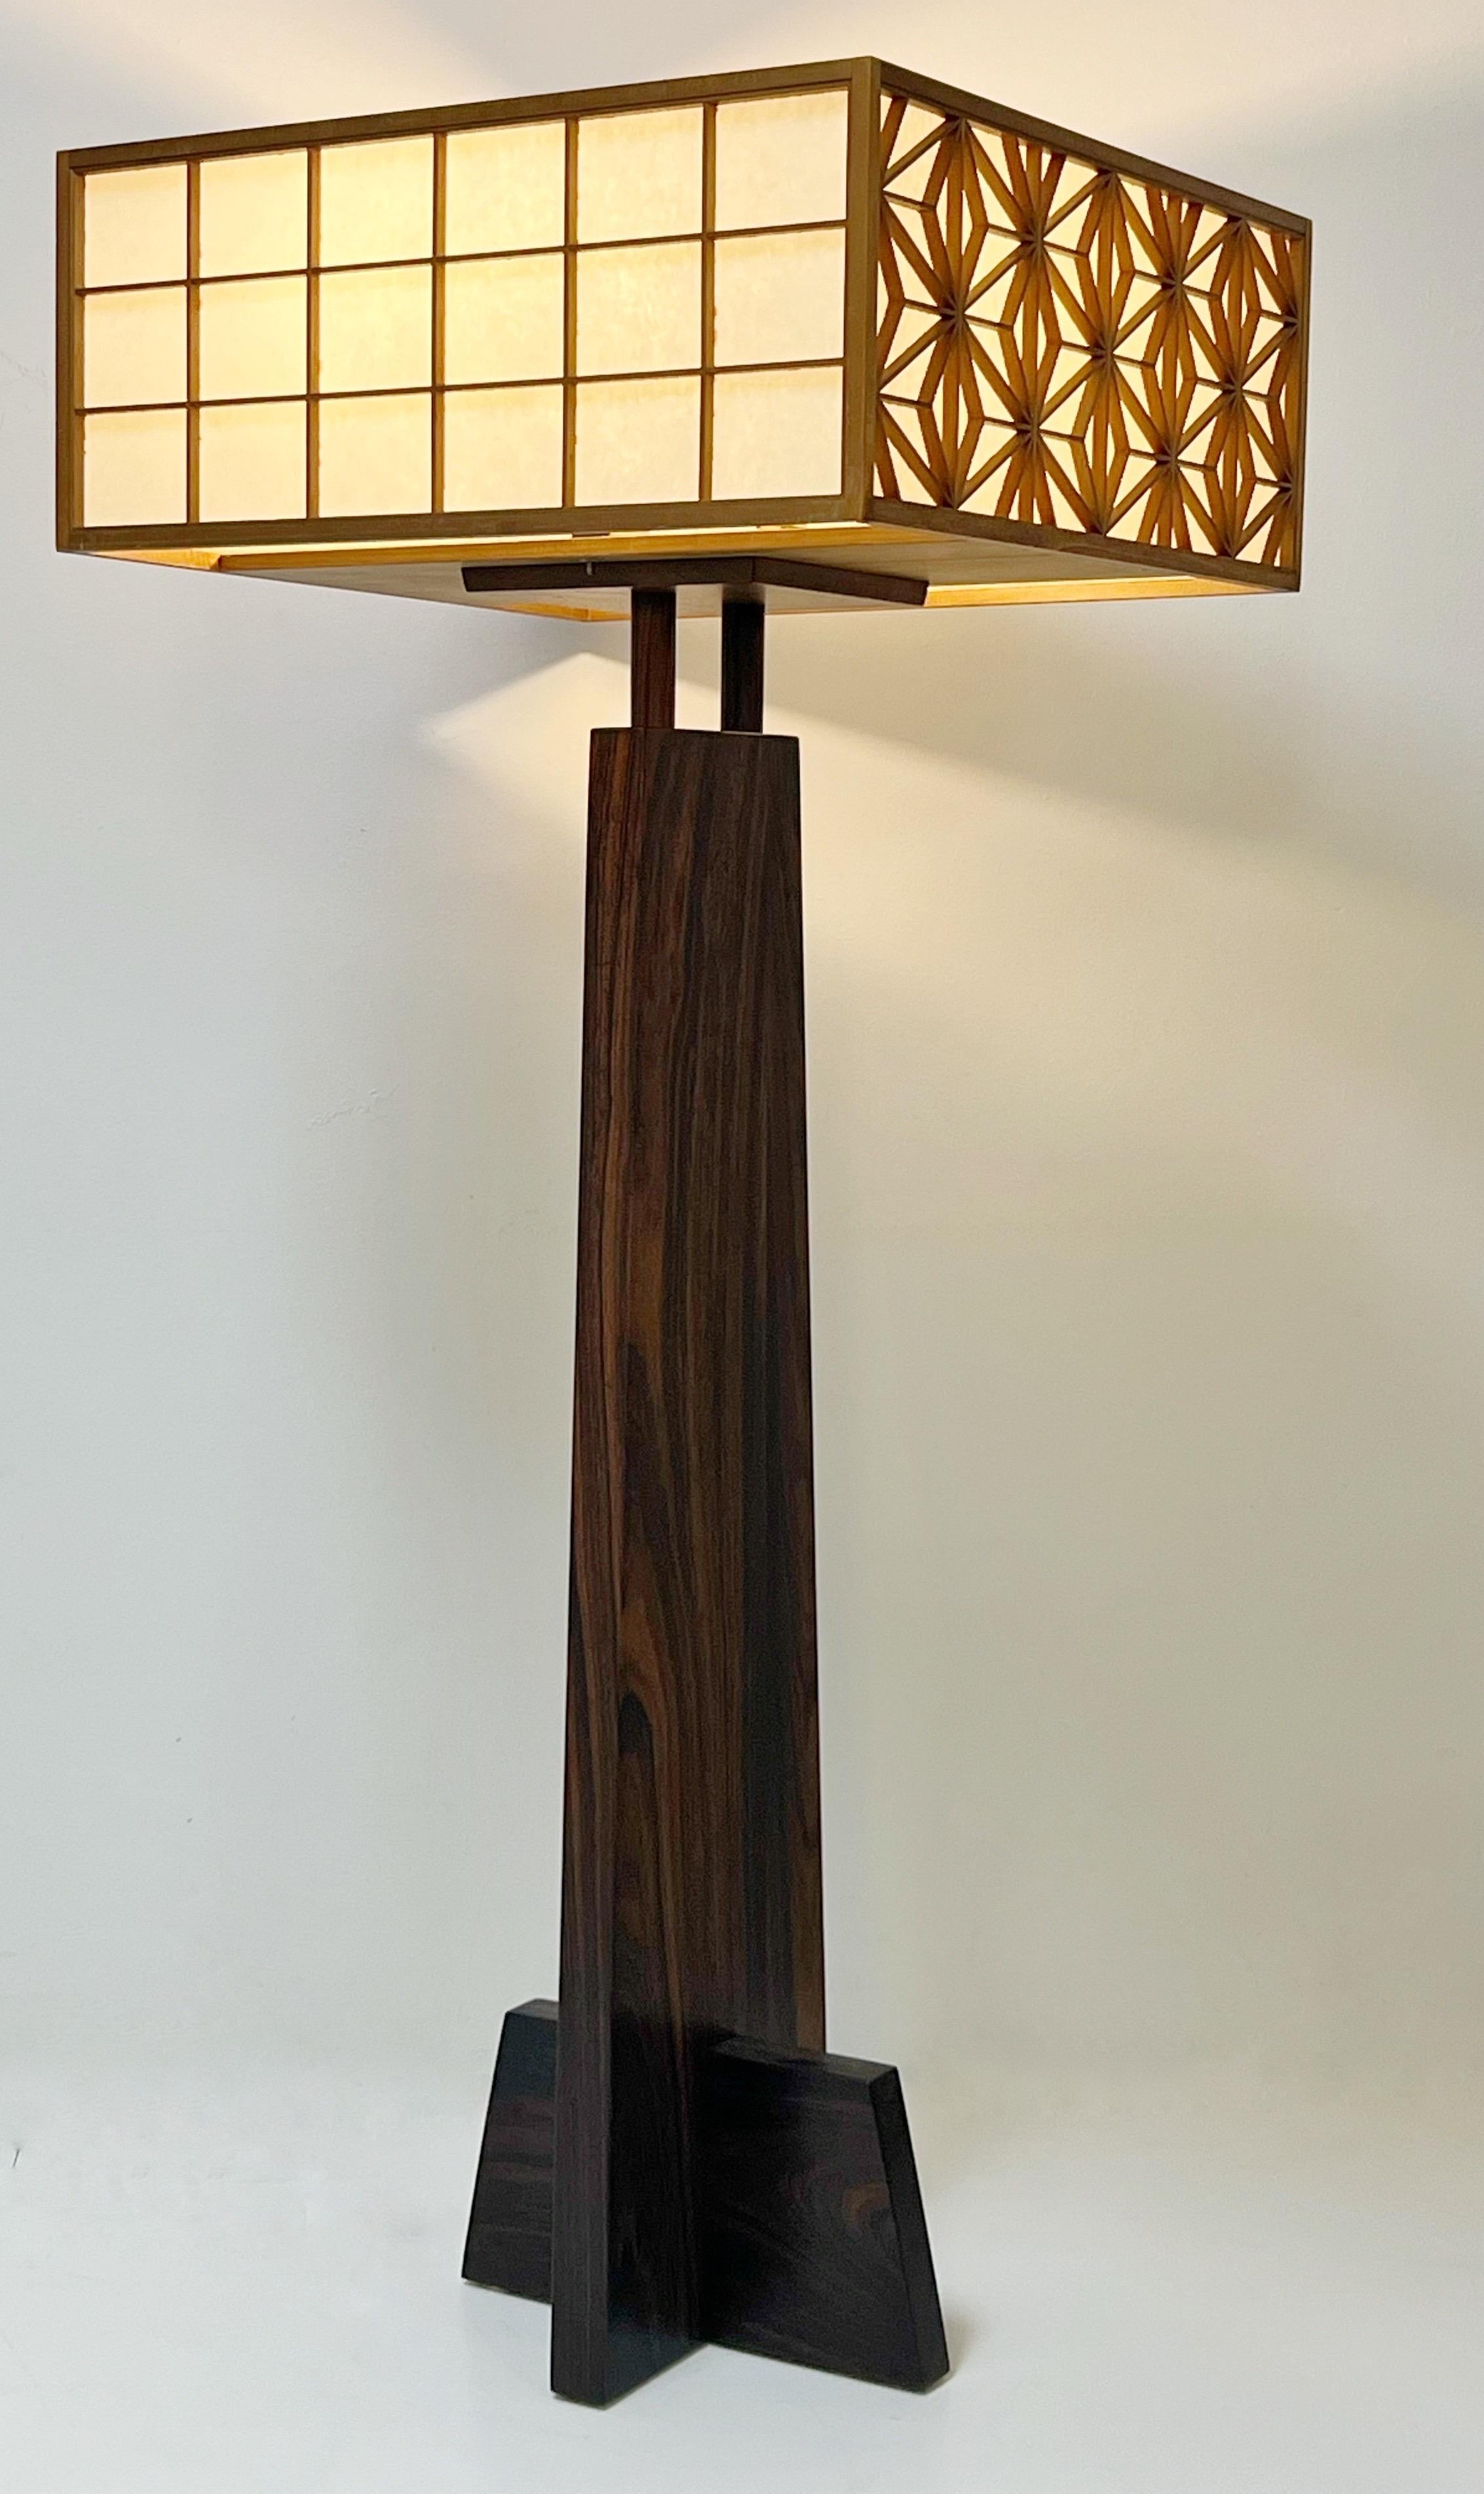 A rare example of this design. The base is Rosewood with beautiful grain and color.  Shade is 24.25” square and 10” inches tall. Total height of lamp is 58.5” 
Possibly a unique specimen with the rosewood base. 
Marked with client’s name where shade